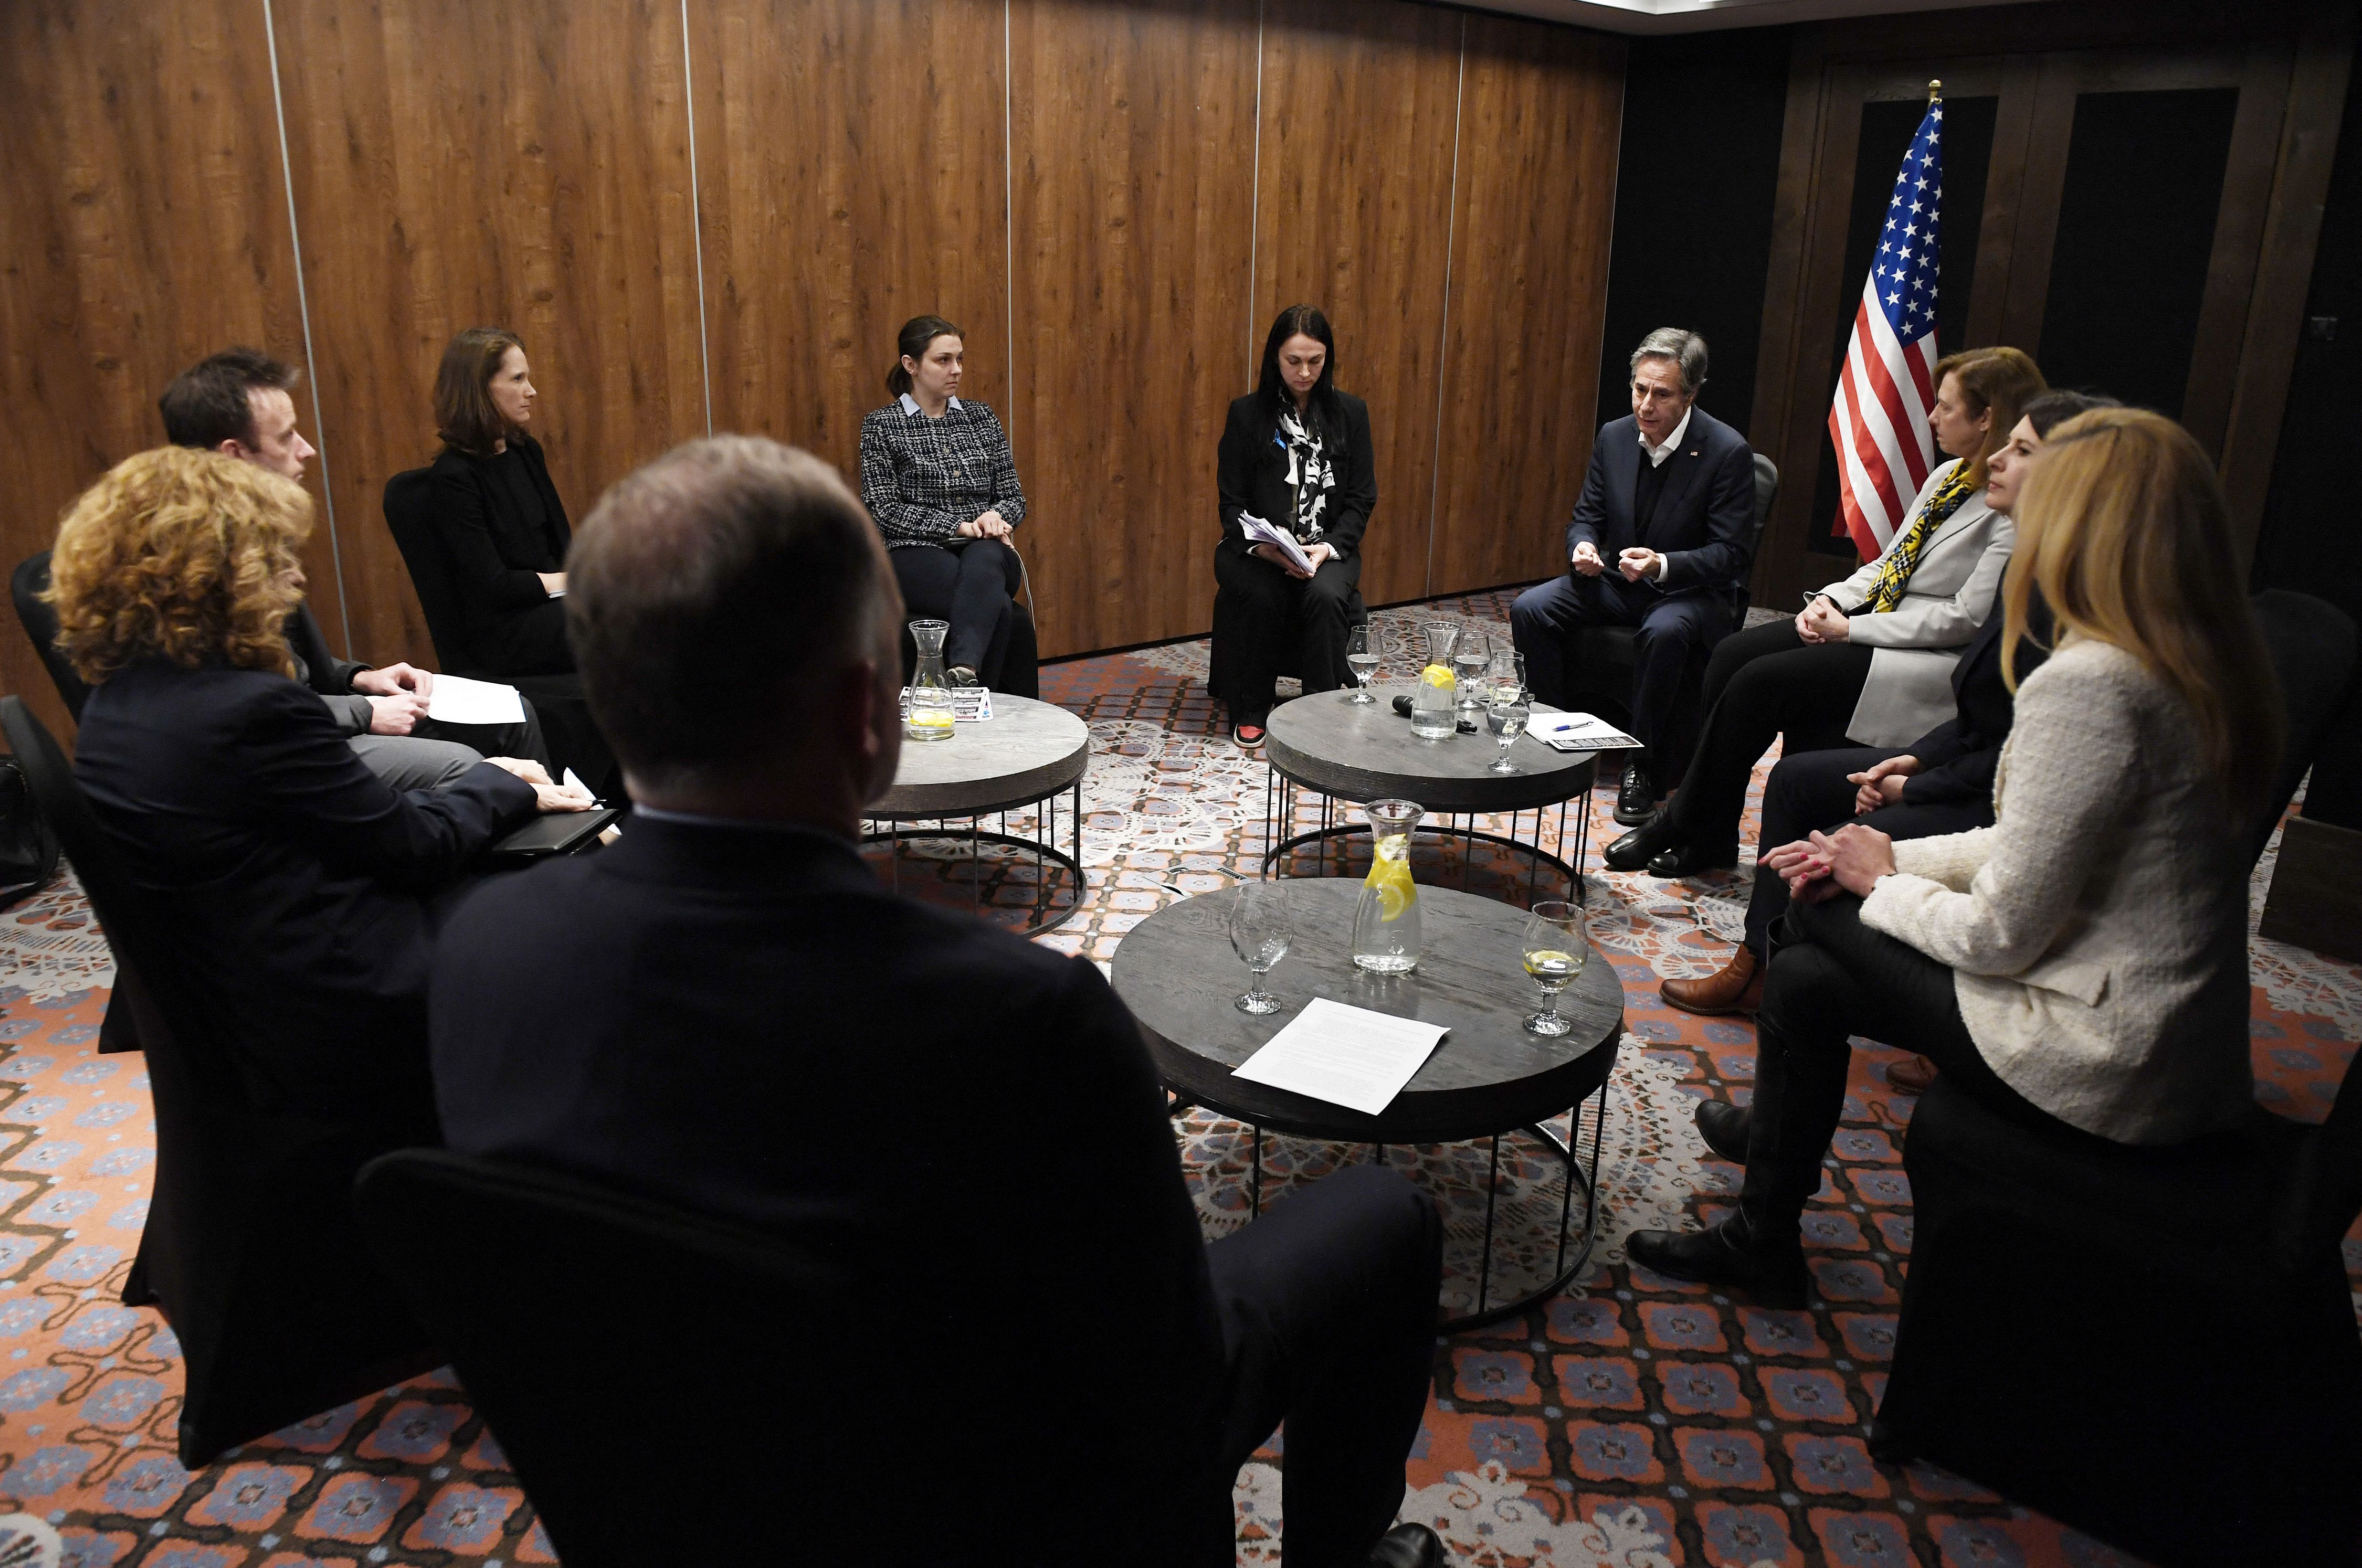 Secretary of State Antony Blinken meets with members of the Ukrainian Civil Society in Rzeszów, Poland on March 5, 202